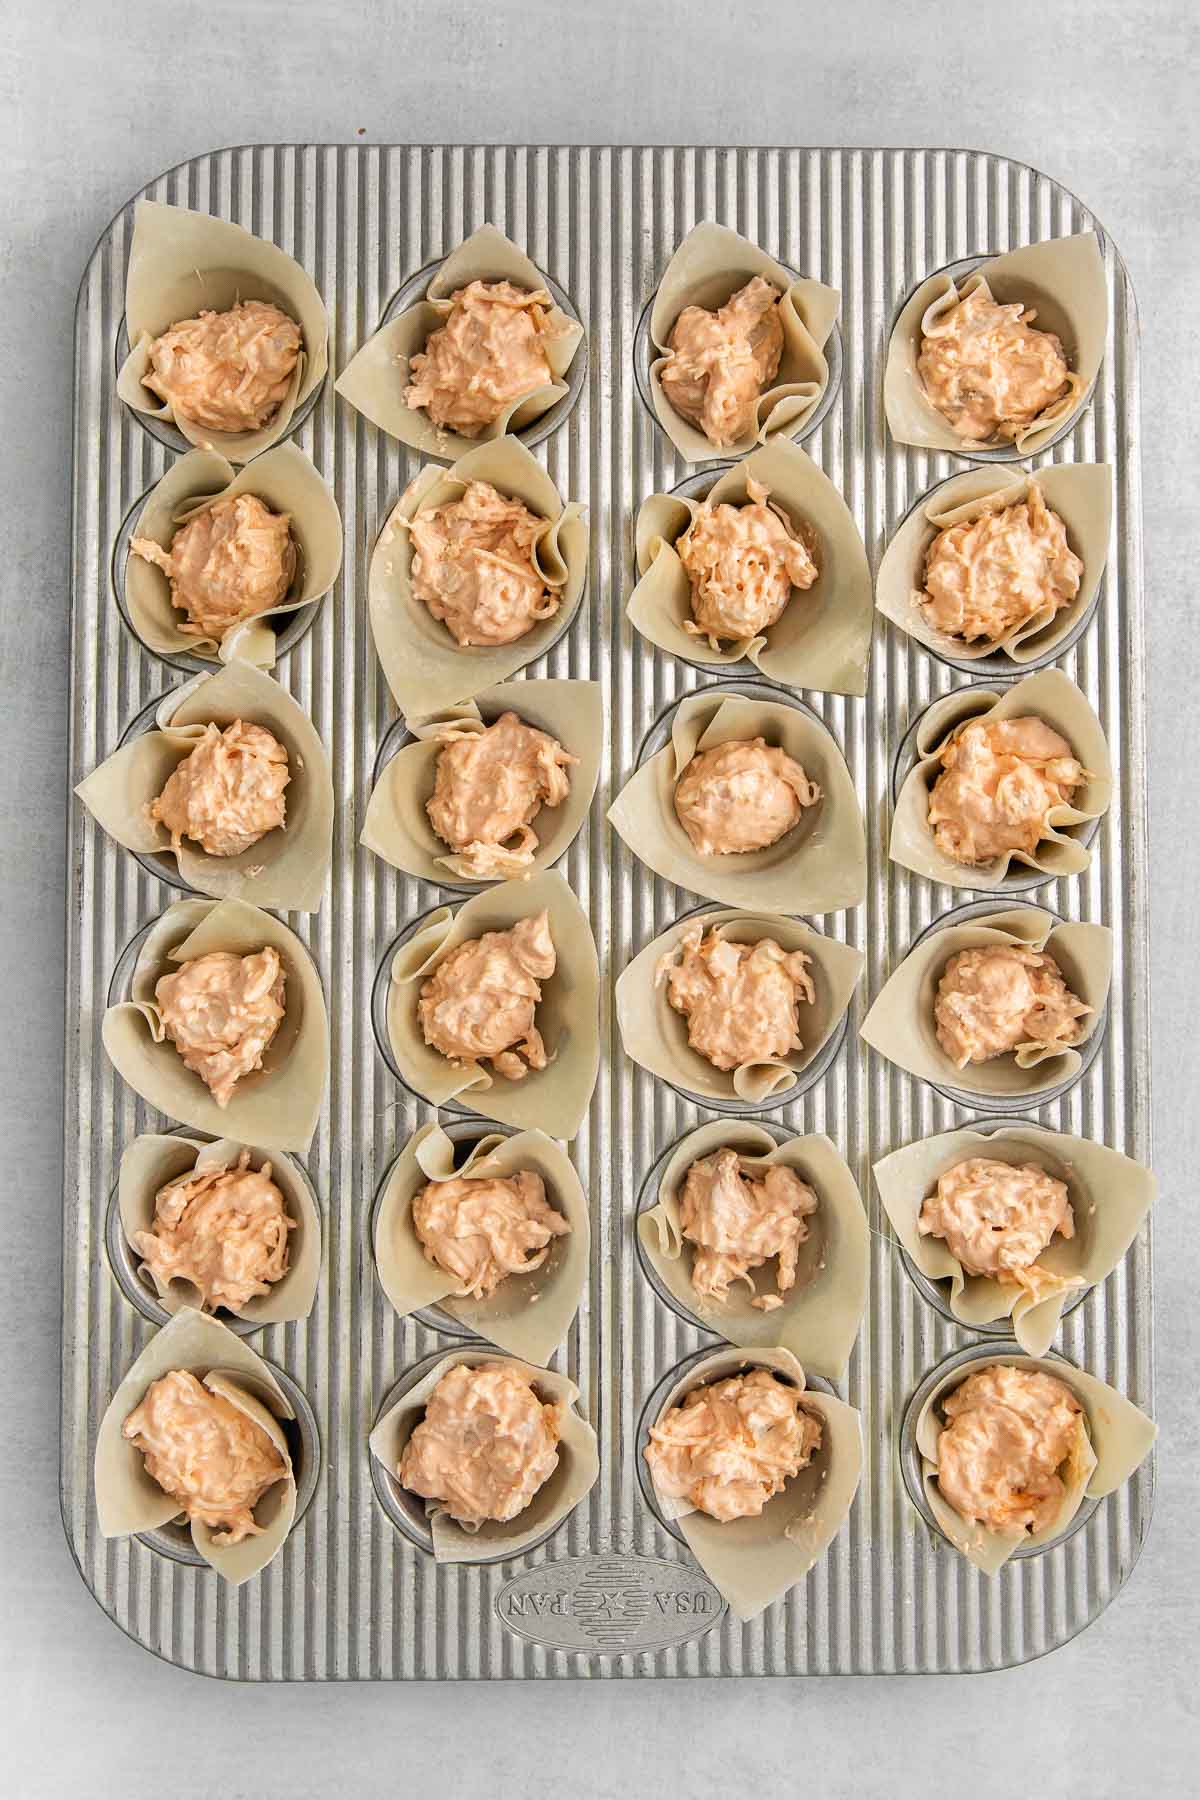 min muffin tin with 24 wonton wrappers filled with buffalo chicken and cheese mixture.